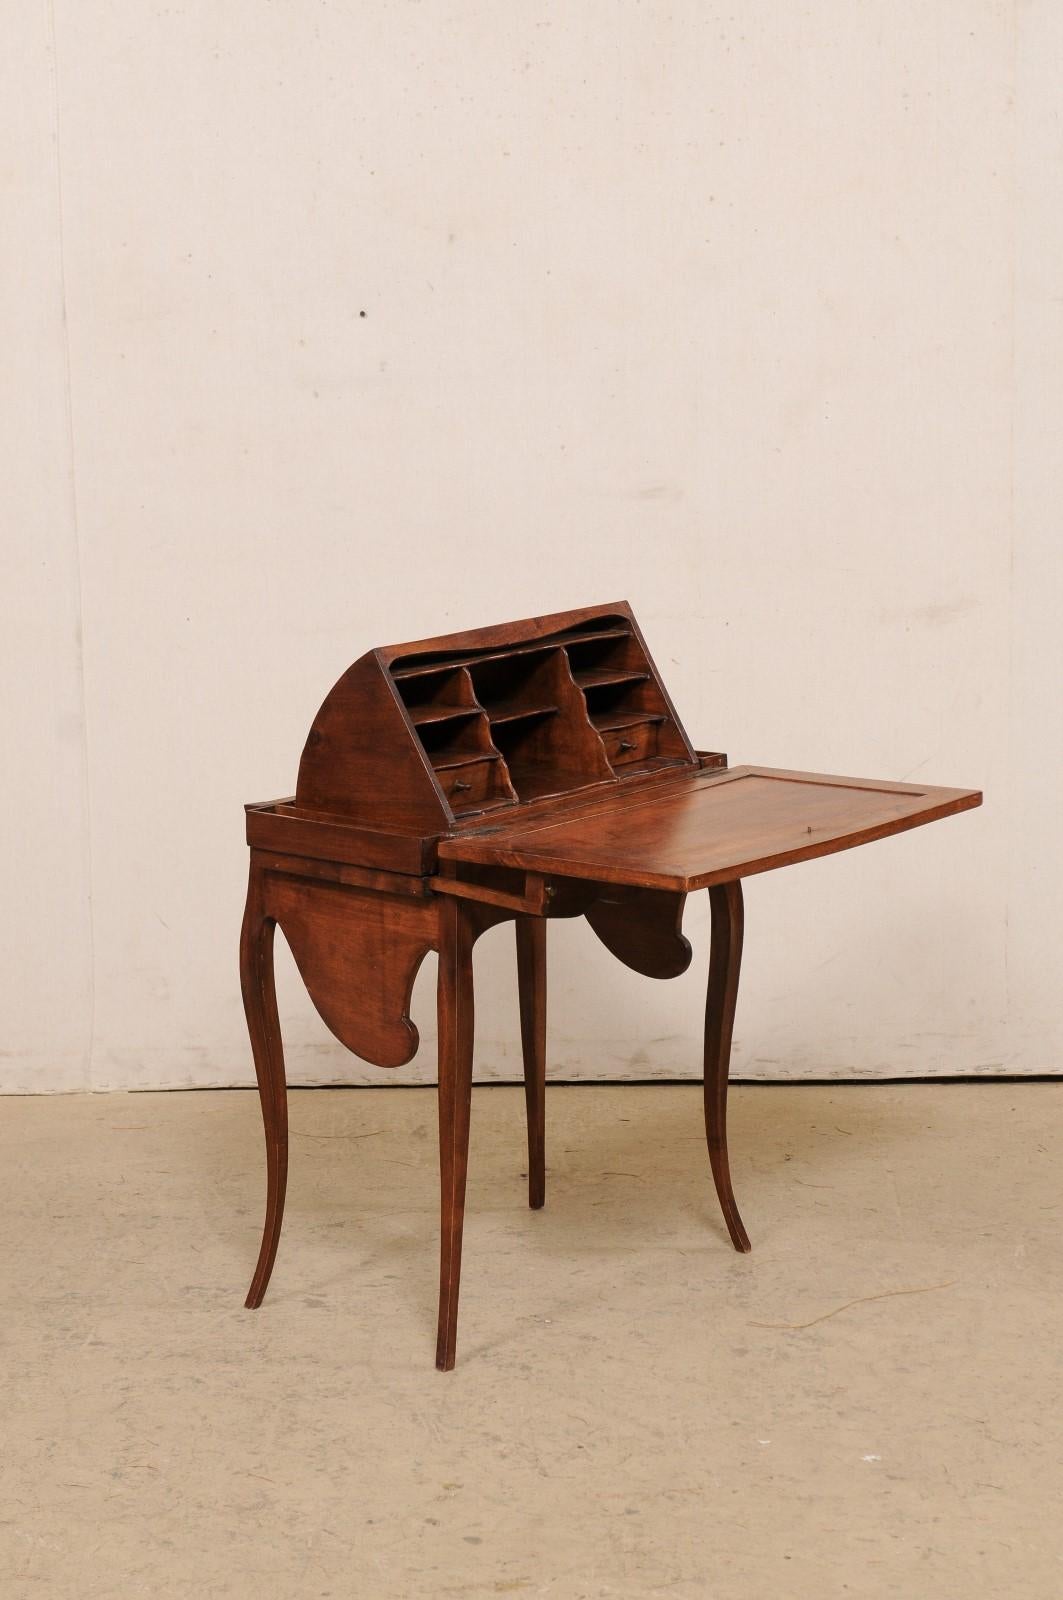 French 19th C. Table w/ Unusual & Creative Drop Down Storage-Great for Crafting 4